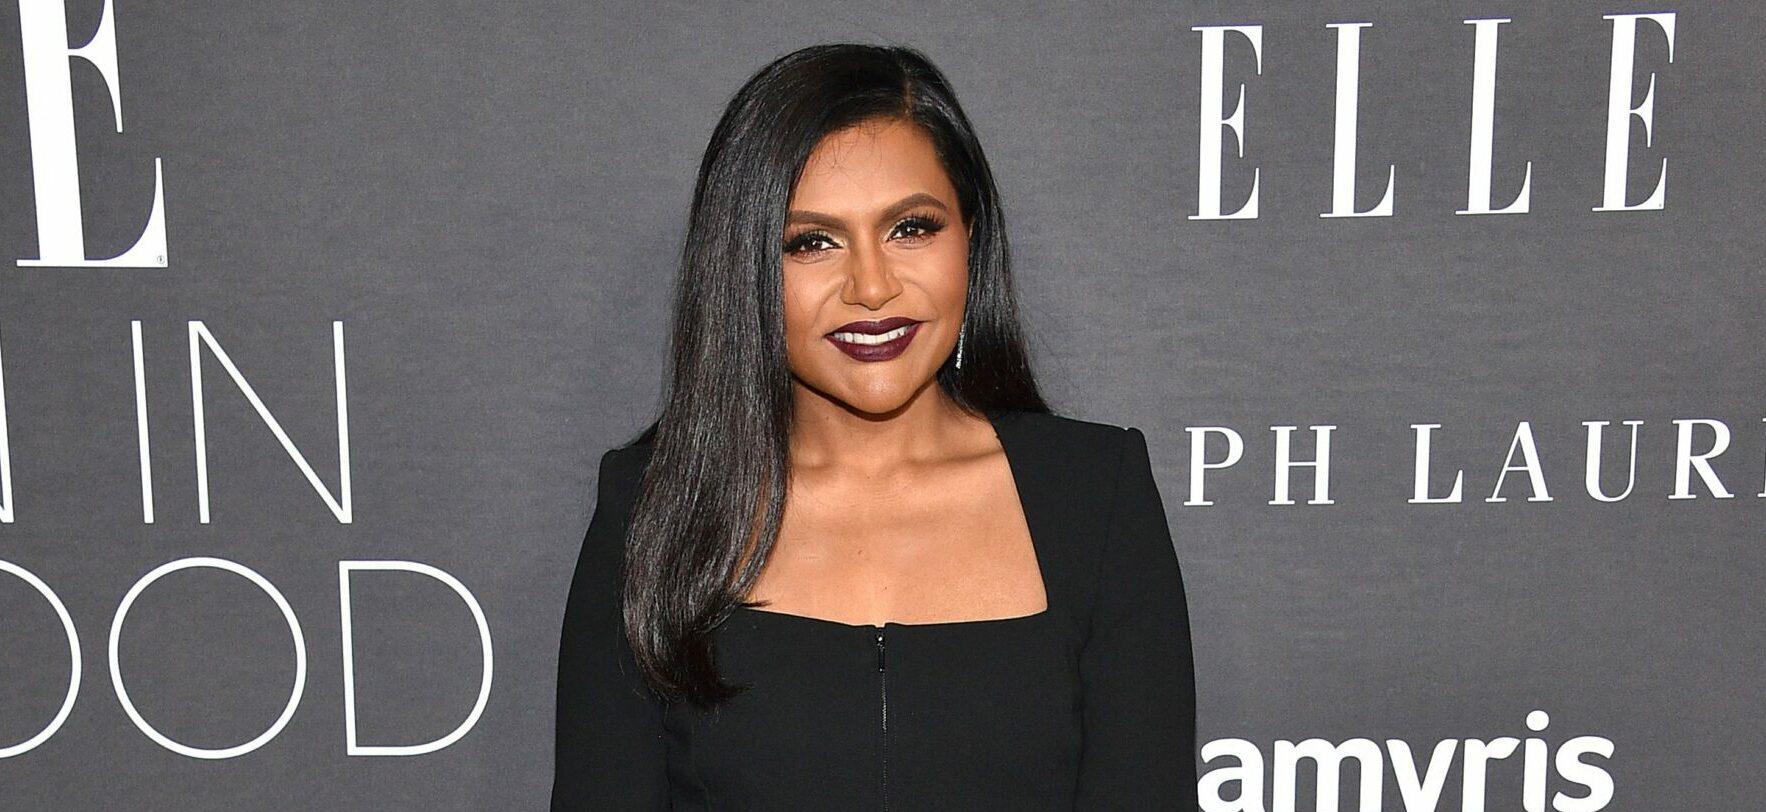 Mindy Kaling Subjected To Ozempic Rumors After Flaunting Slim Figure At Award Show